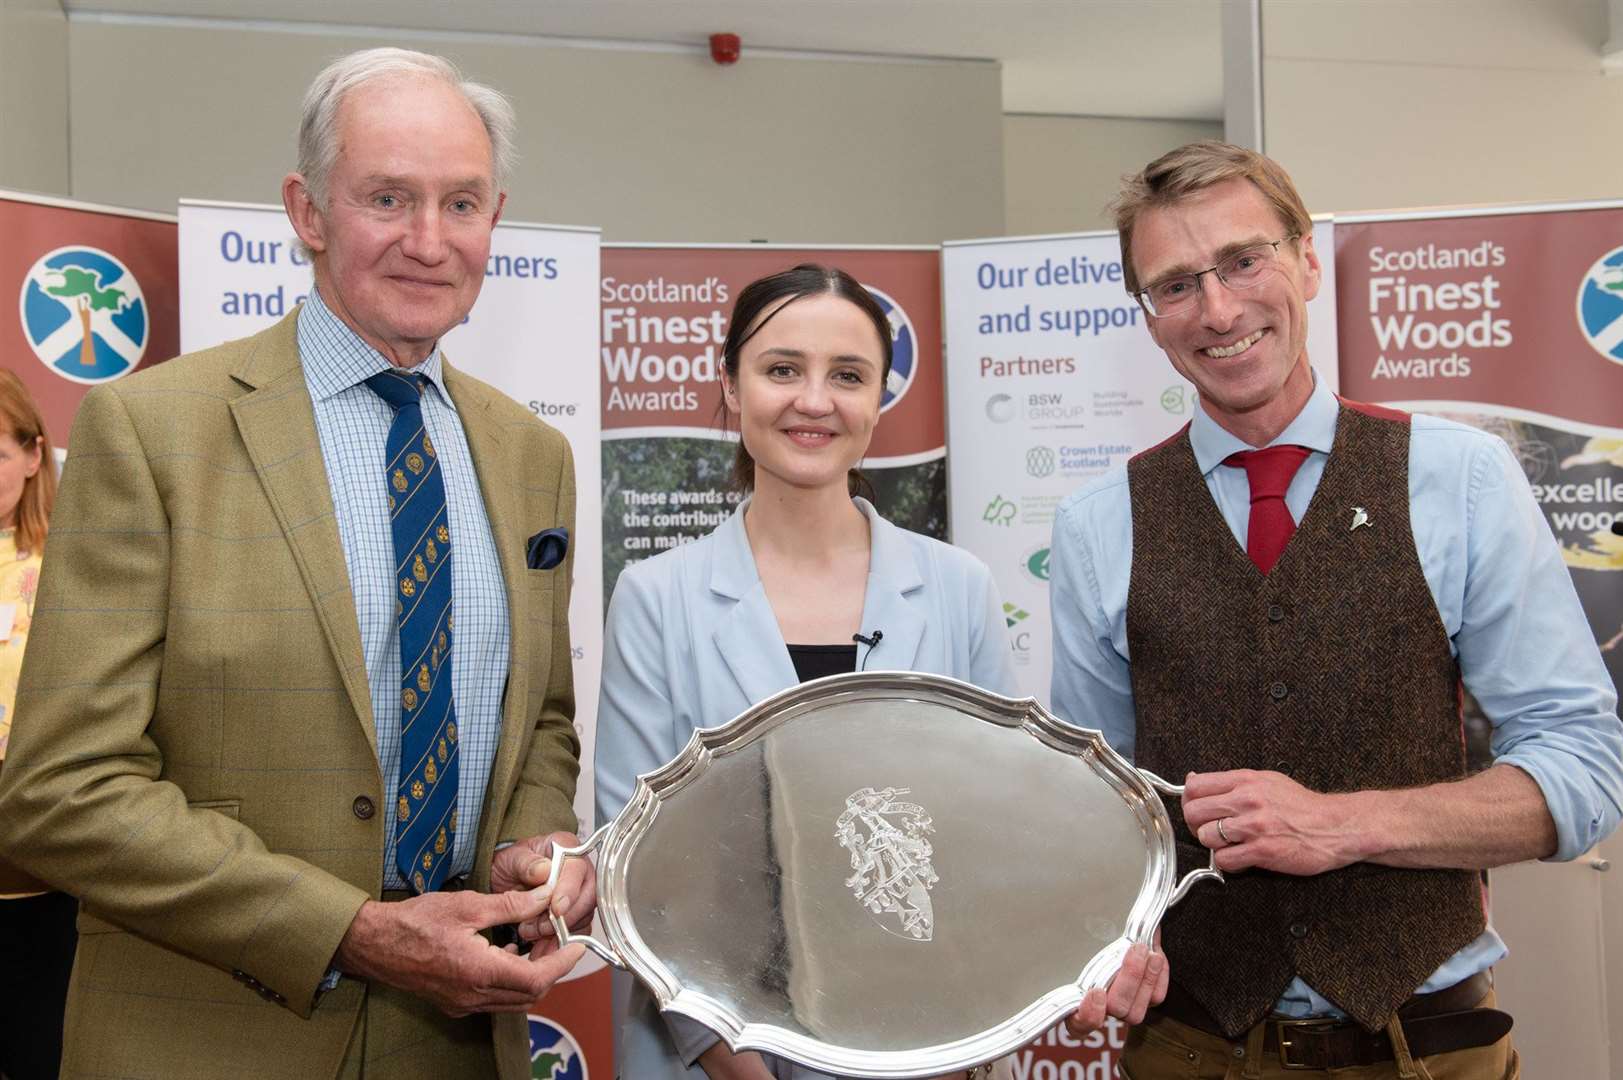 Joint winners of the Farm Woodland Award and the Lilburn Trophy - Michael Clarke, Williamwood (l) & Richard Lockett, Knockbain (r) with Màiri McAllan, Minister for Environment and Land Reform. SFWA 2. Picture by: Julie Broadfoot